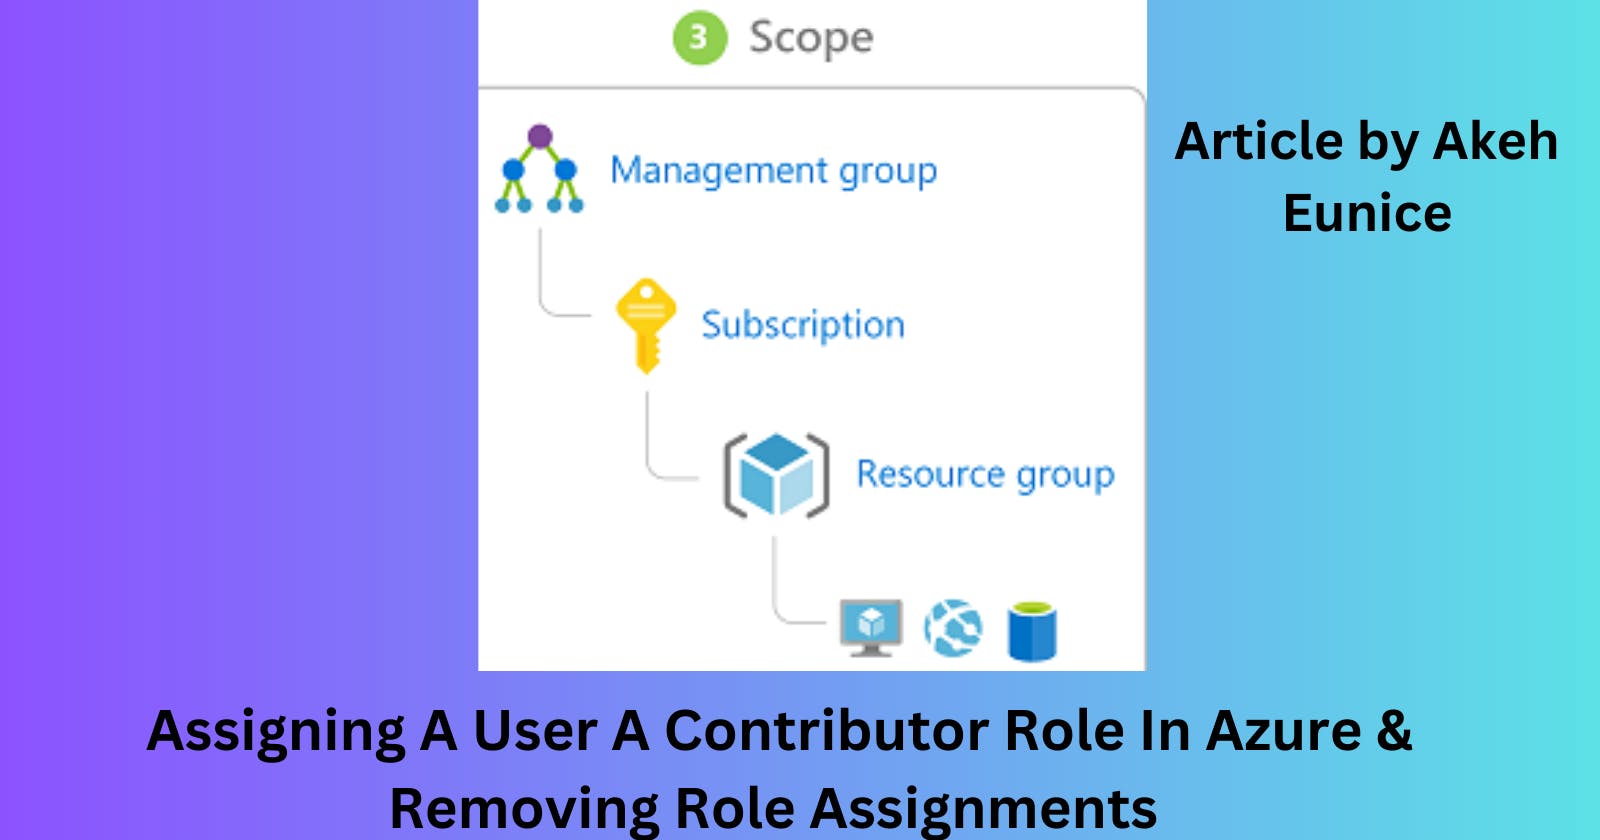 Assigning A User A Contributor Role In Azure & Removing Role Assignments